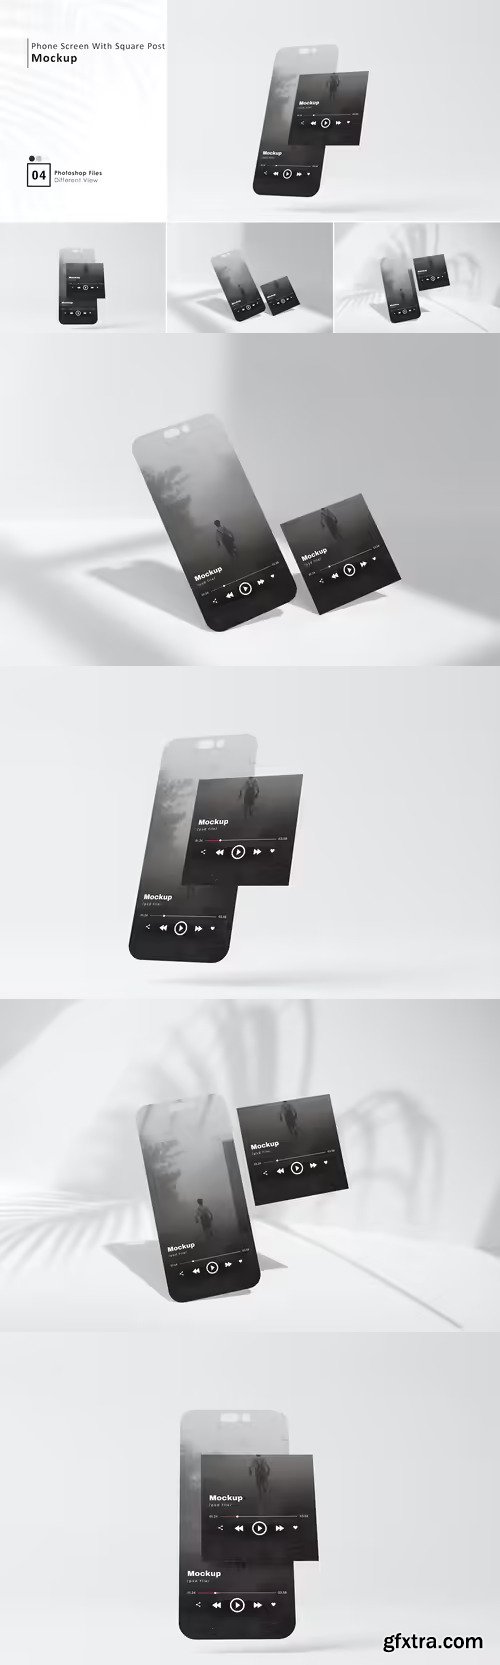 Phone Screen With Square Post Mockup